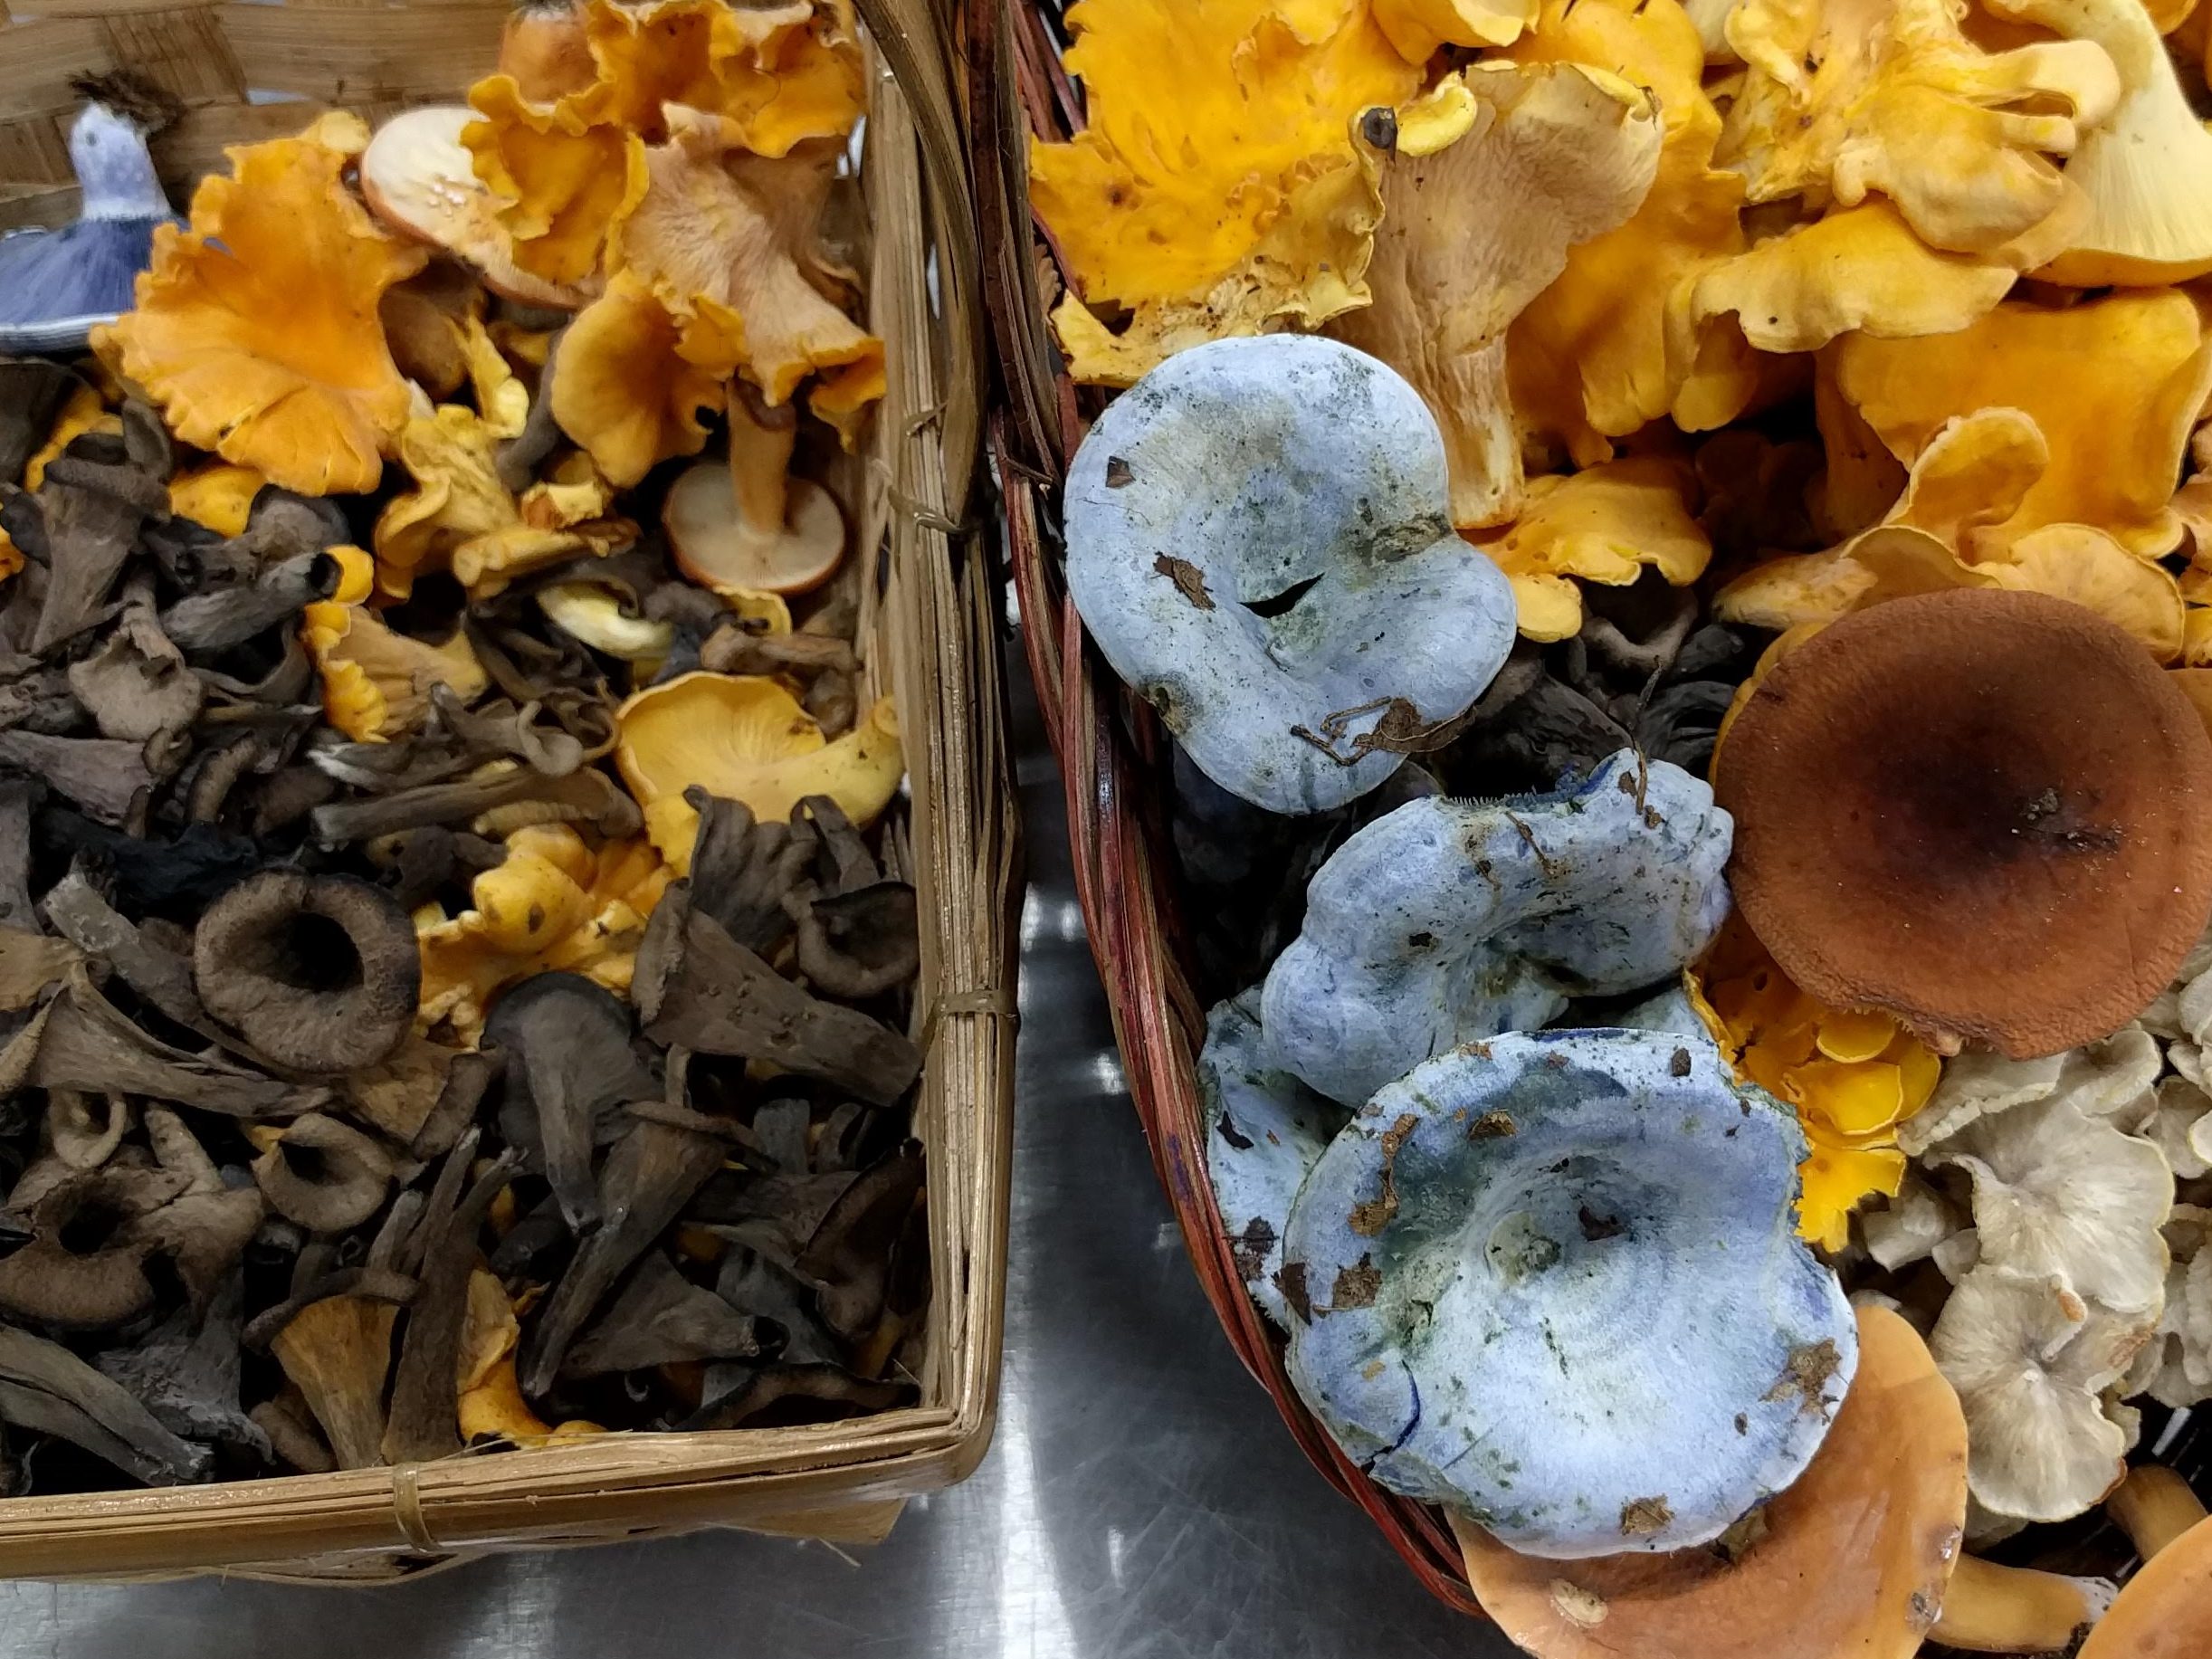 a selection of foraged mushrooms: black trumpets, chanterelles, indigo milkies, and leatherback milkies